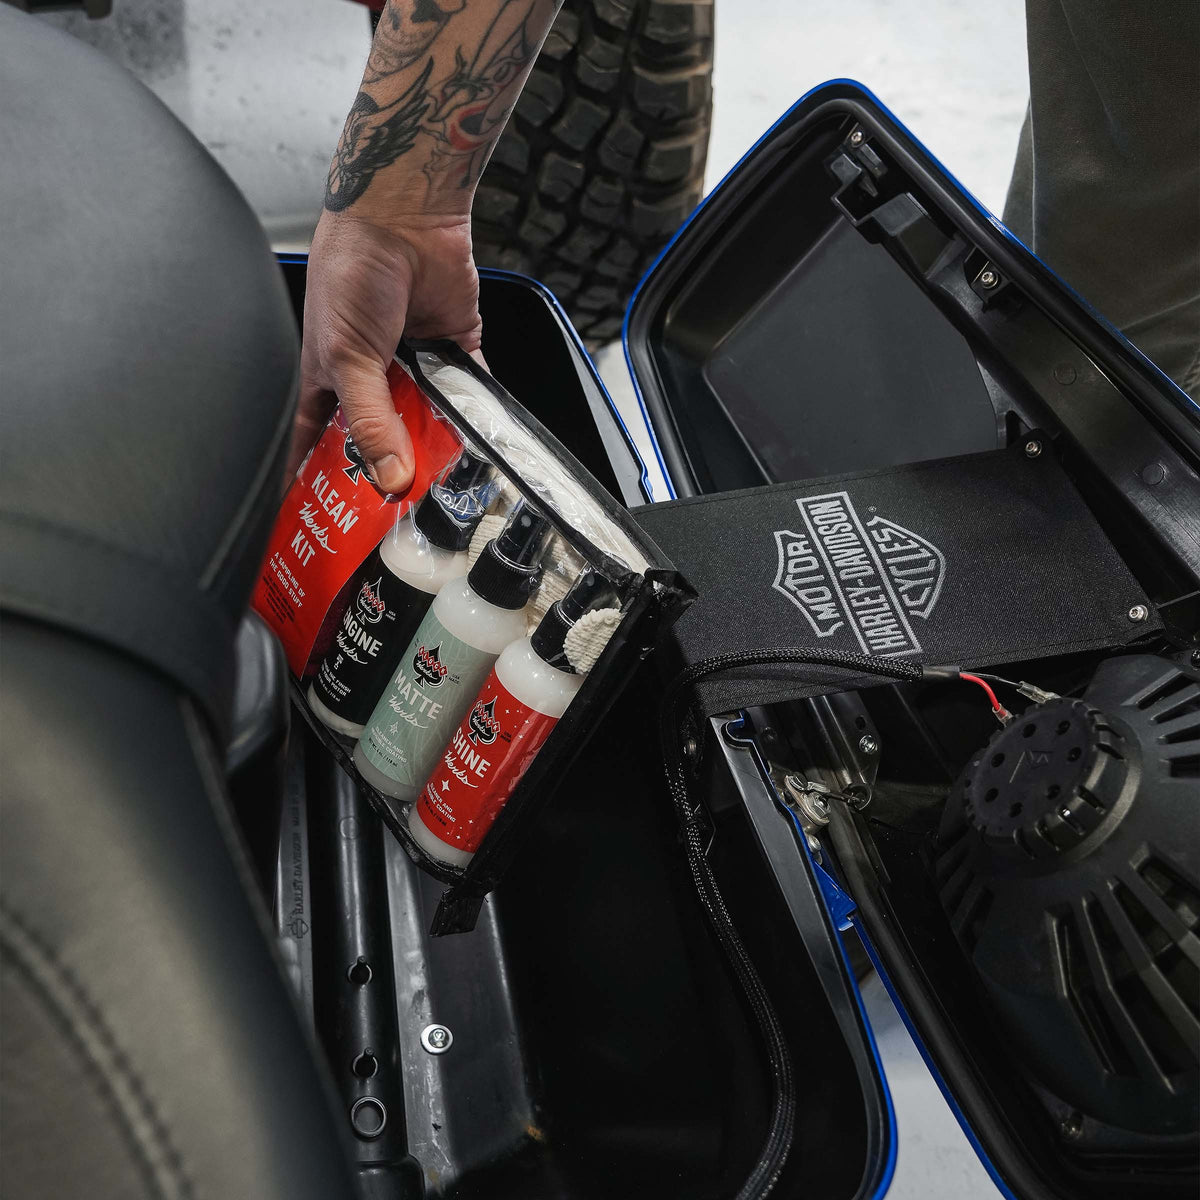 Klean Werks Cleaning Kit fits easily in your motorcycle saddlebag!